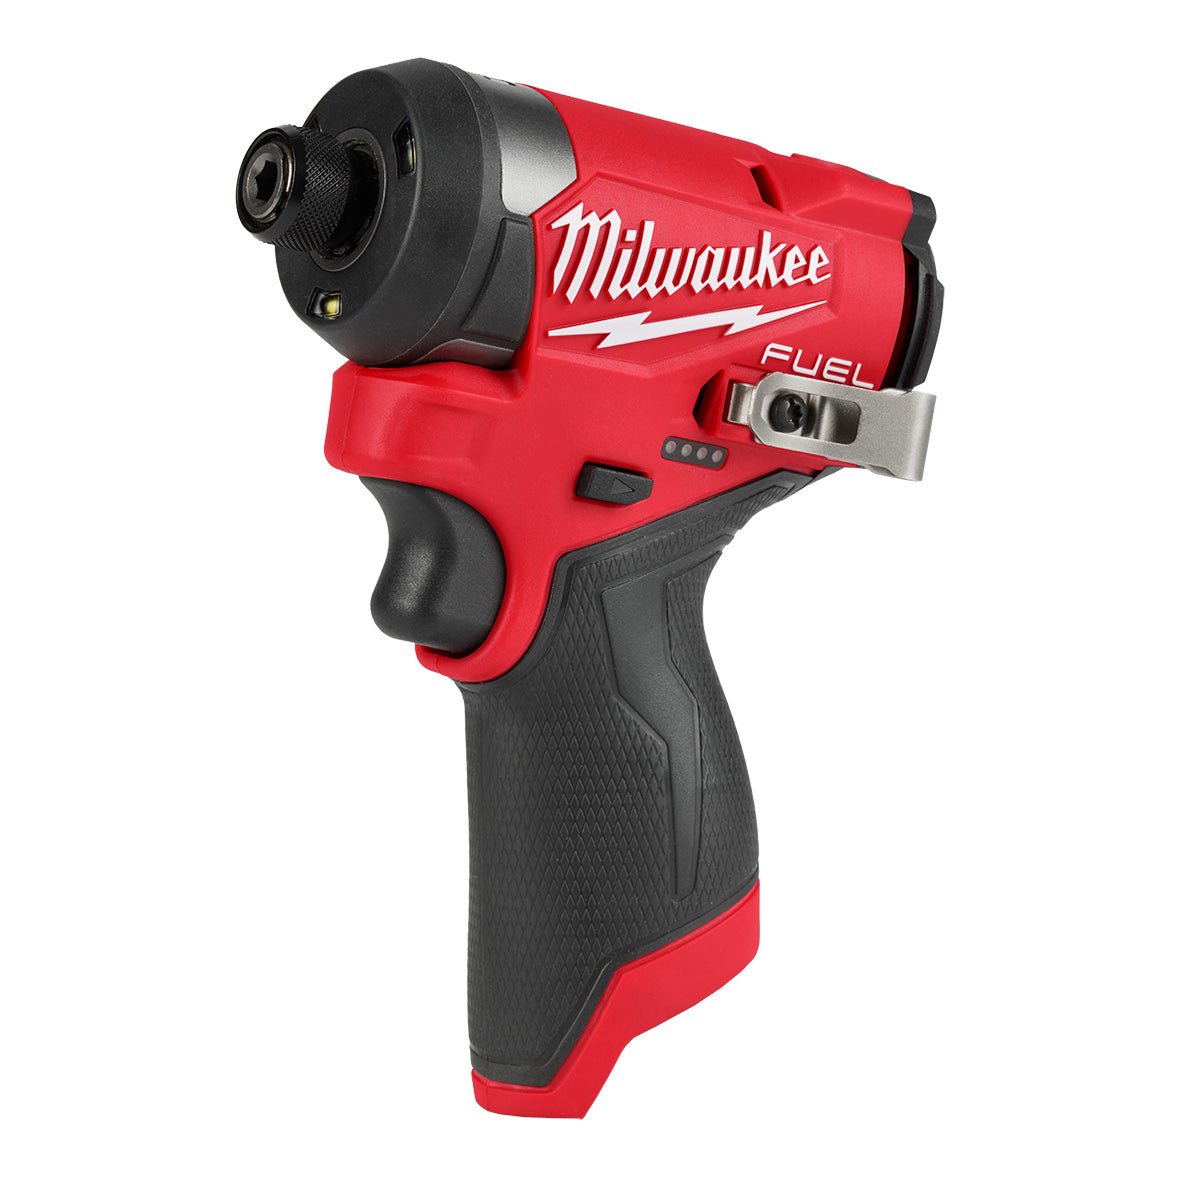 Milwaukee 3453-20  -  M12 FUEL™ 1/4" Hex Impact Driver - TOOL ONLY